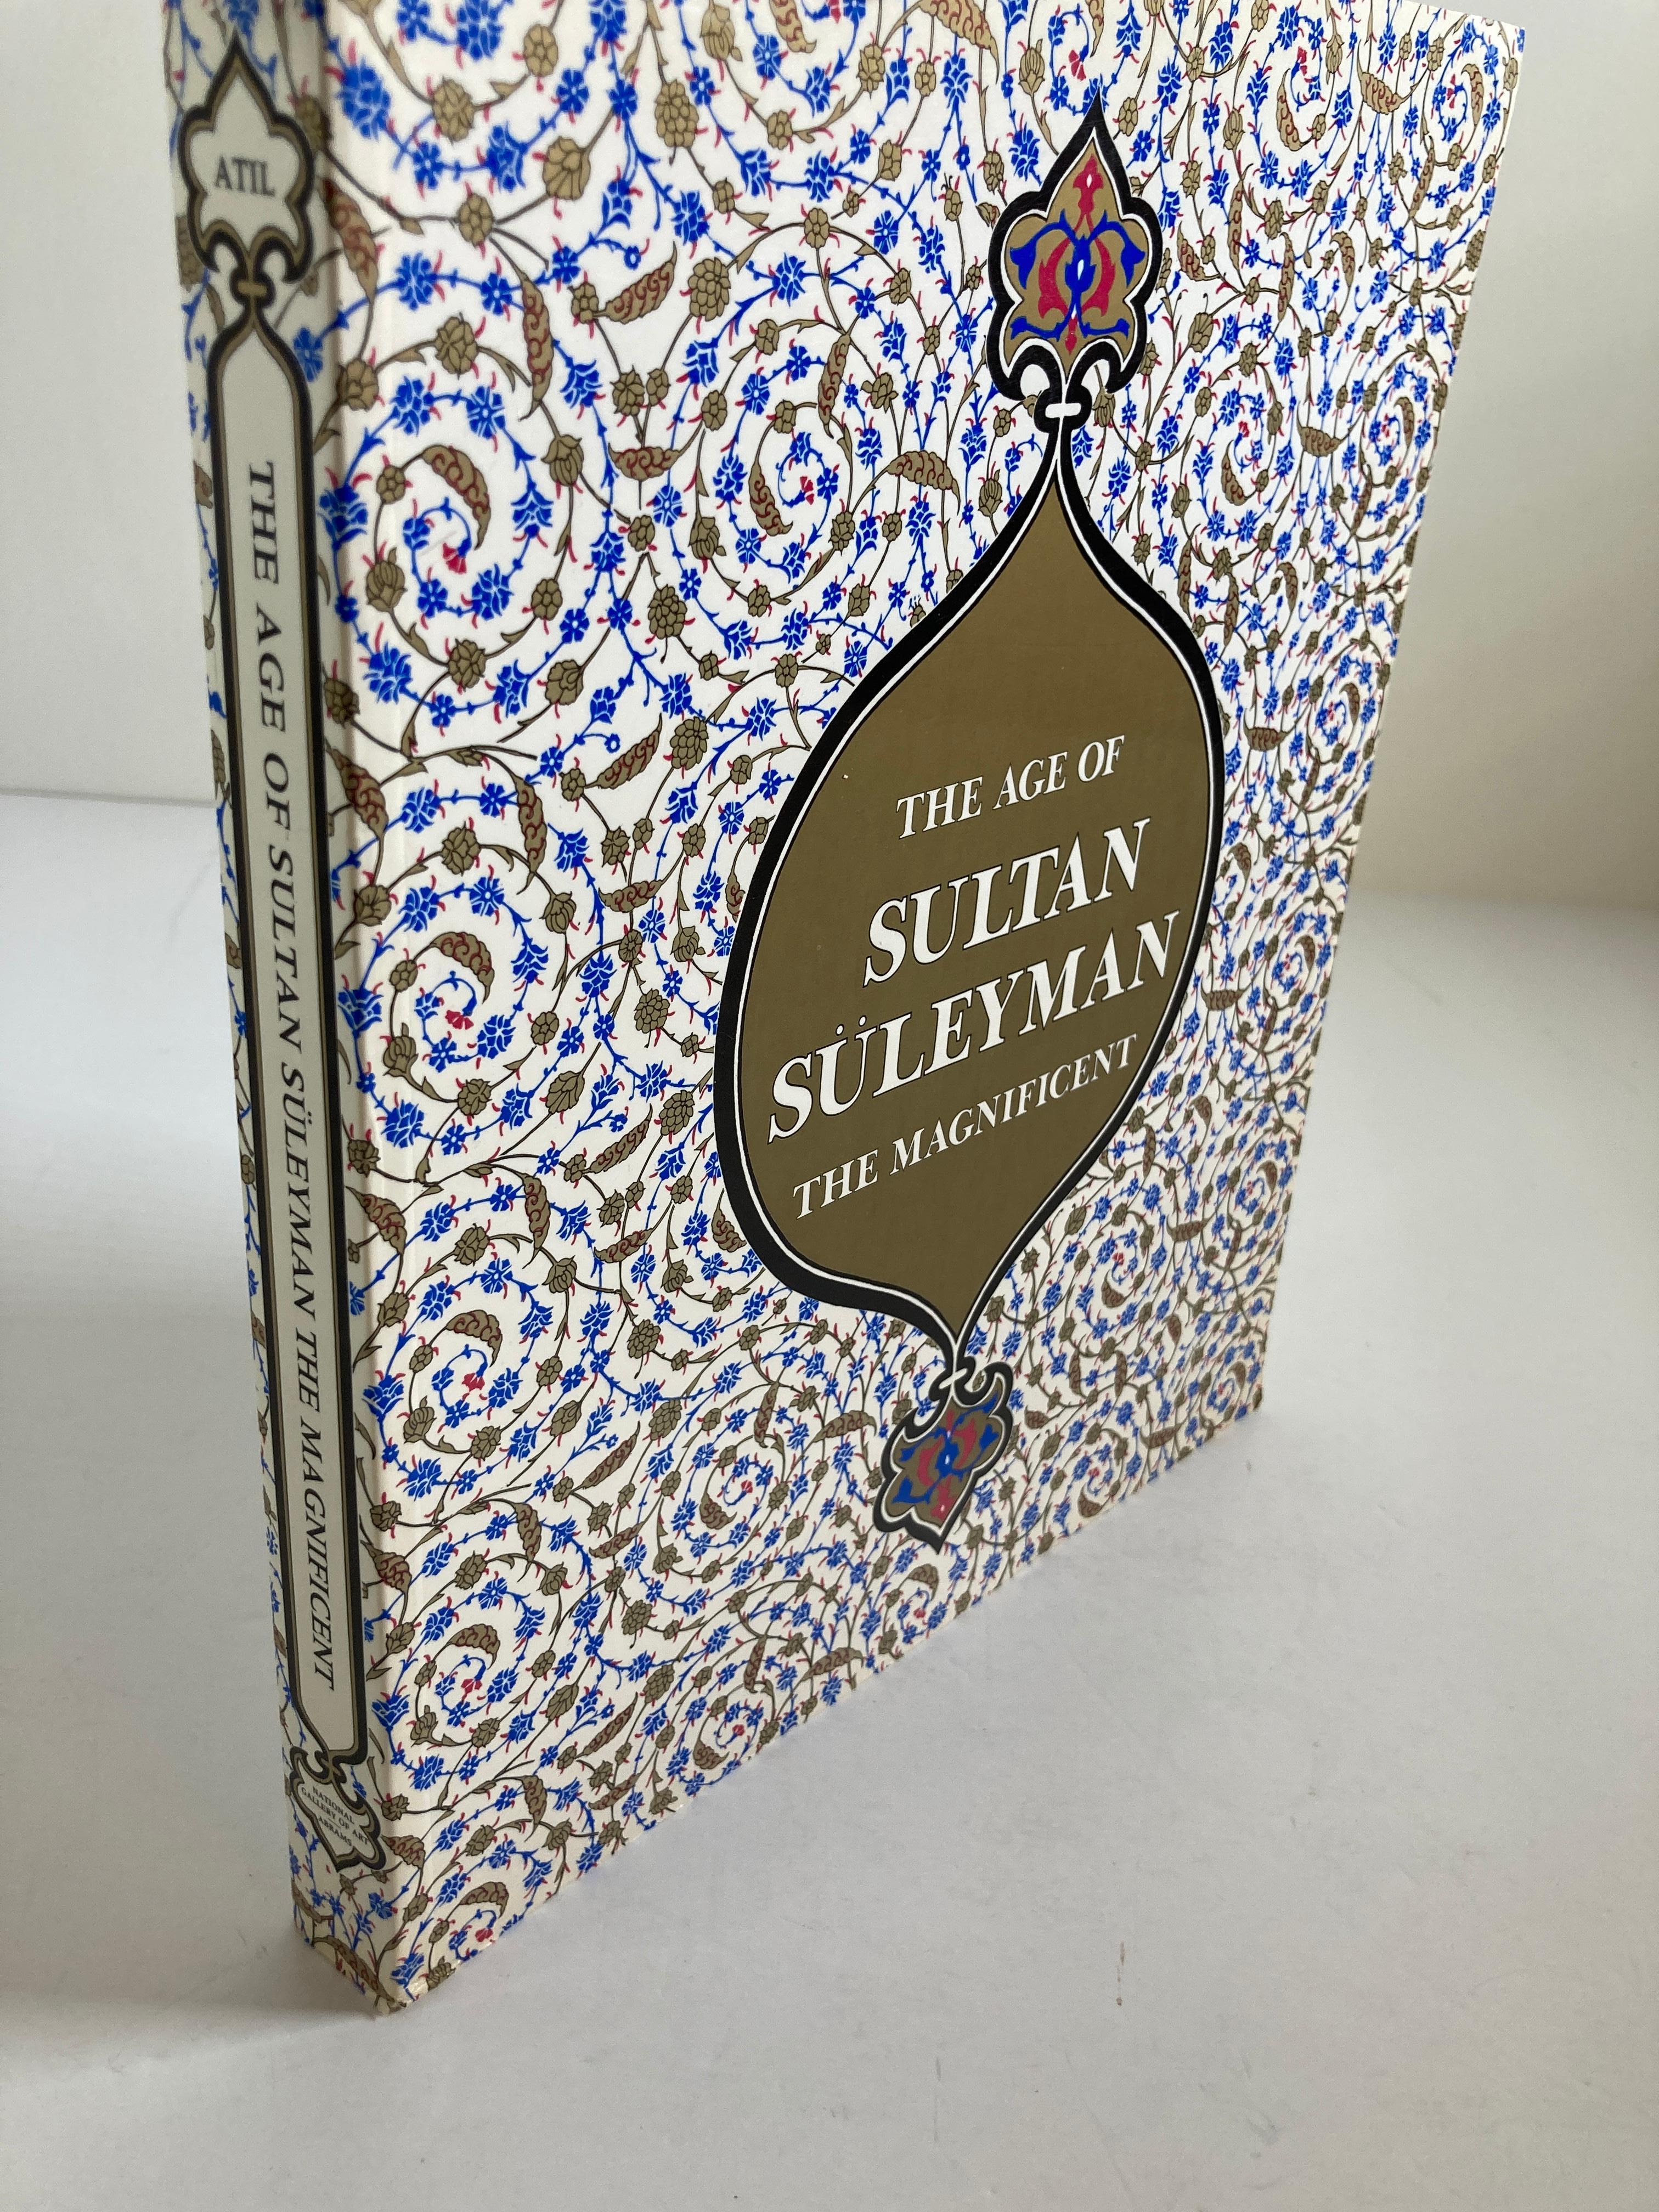 The age of Sultan Su¨leyman the Magnificent Book by Esin Atil
National Gallery of Art, 1987 - Art ottoman - Expositions - 356 pages
This catalog accompanied the first comprehensive exhibition of Turkish art devoted to the most celebrated period of